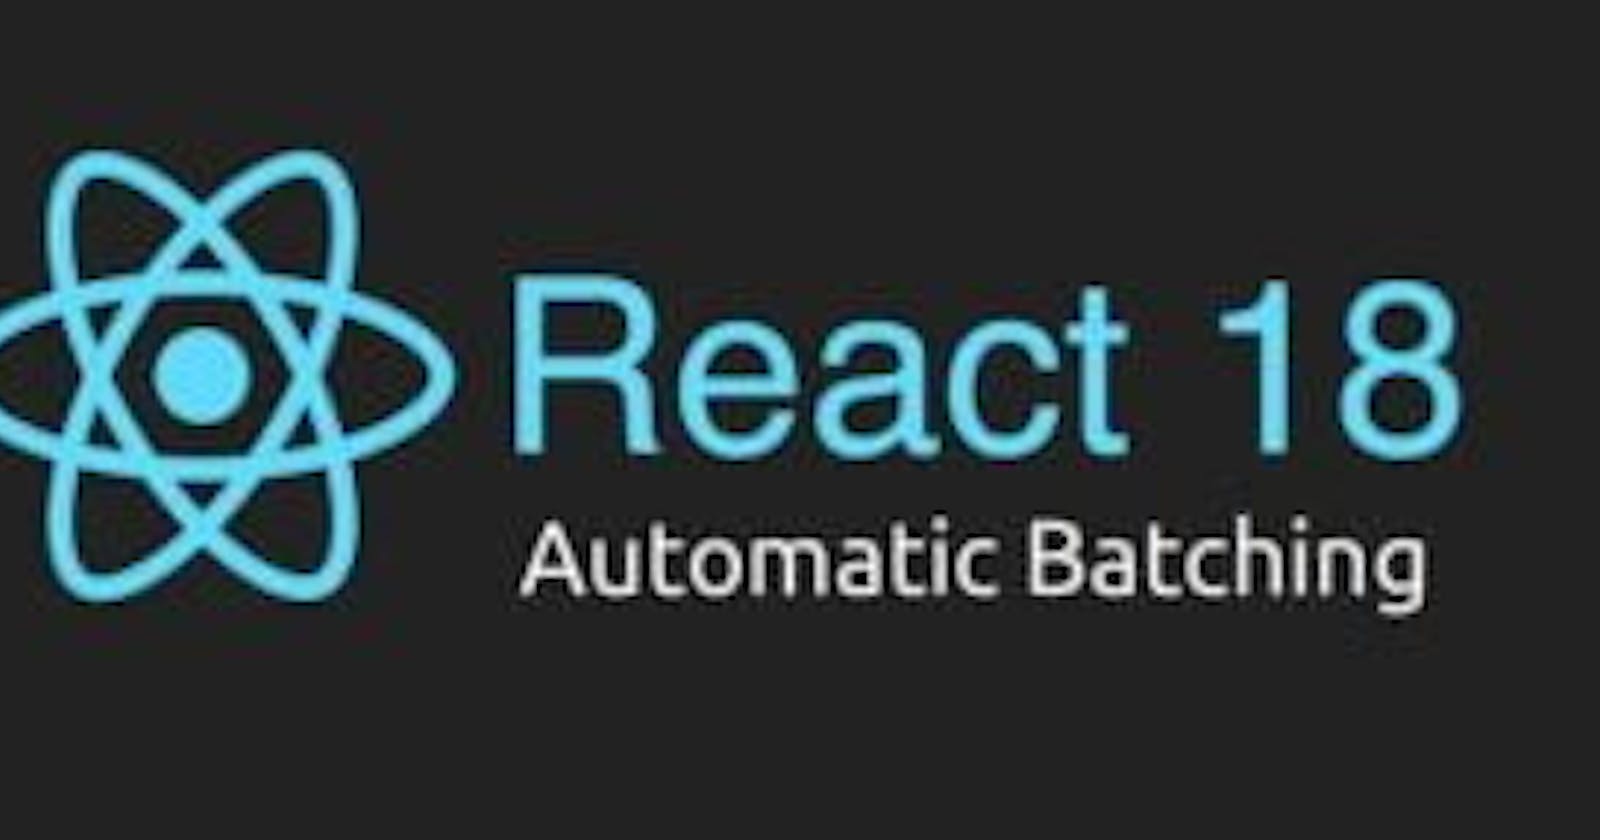 Automatic batching in React 18 helps avoid re-rendering